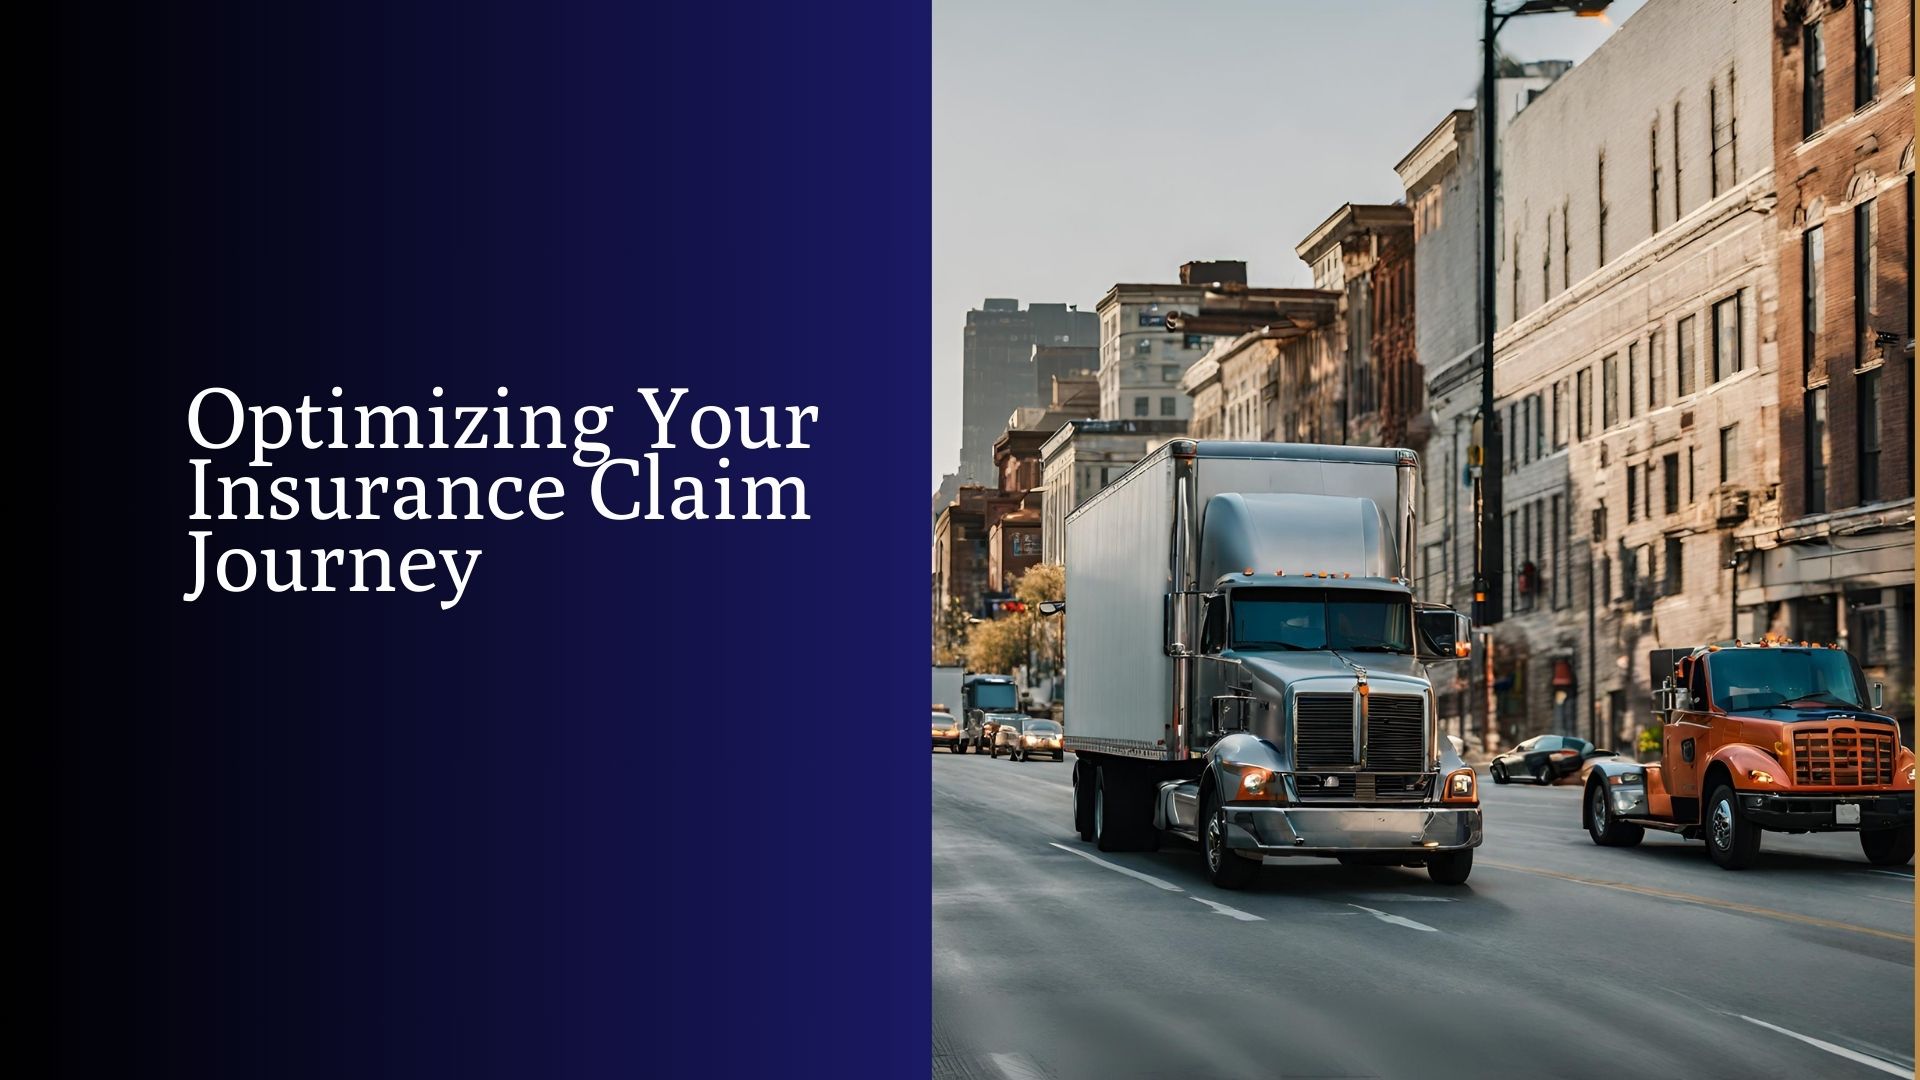 Attorney-Accident-Truck-Optimizing-Your-Insurance-Claim-Journey 